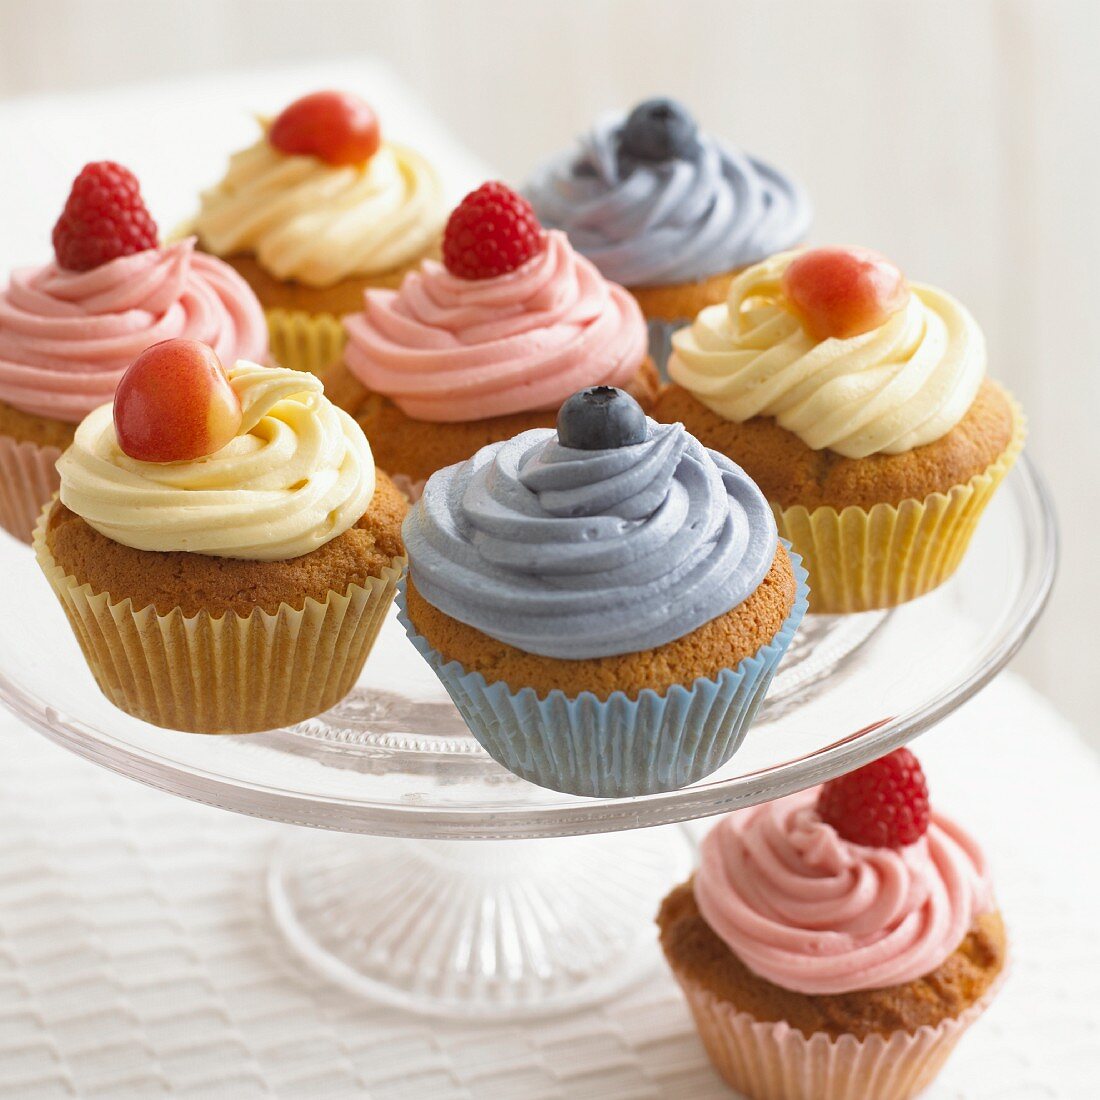 Cupcakes with raspberries and blueberries on a cake stand